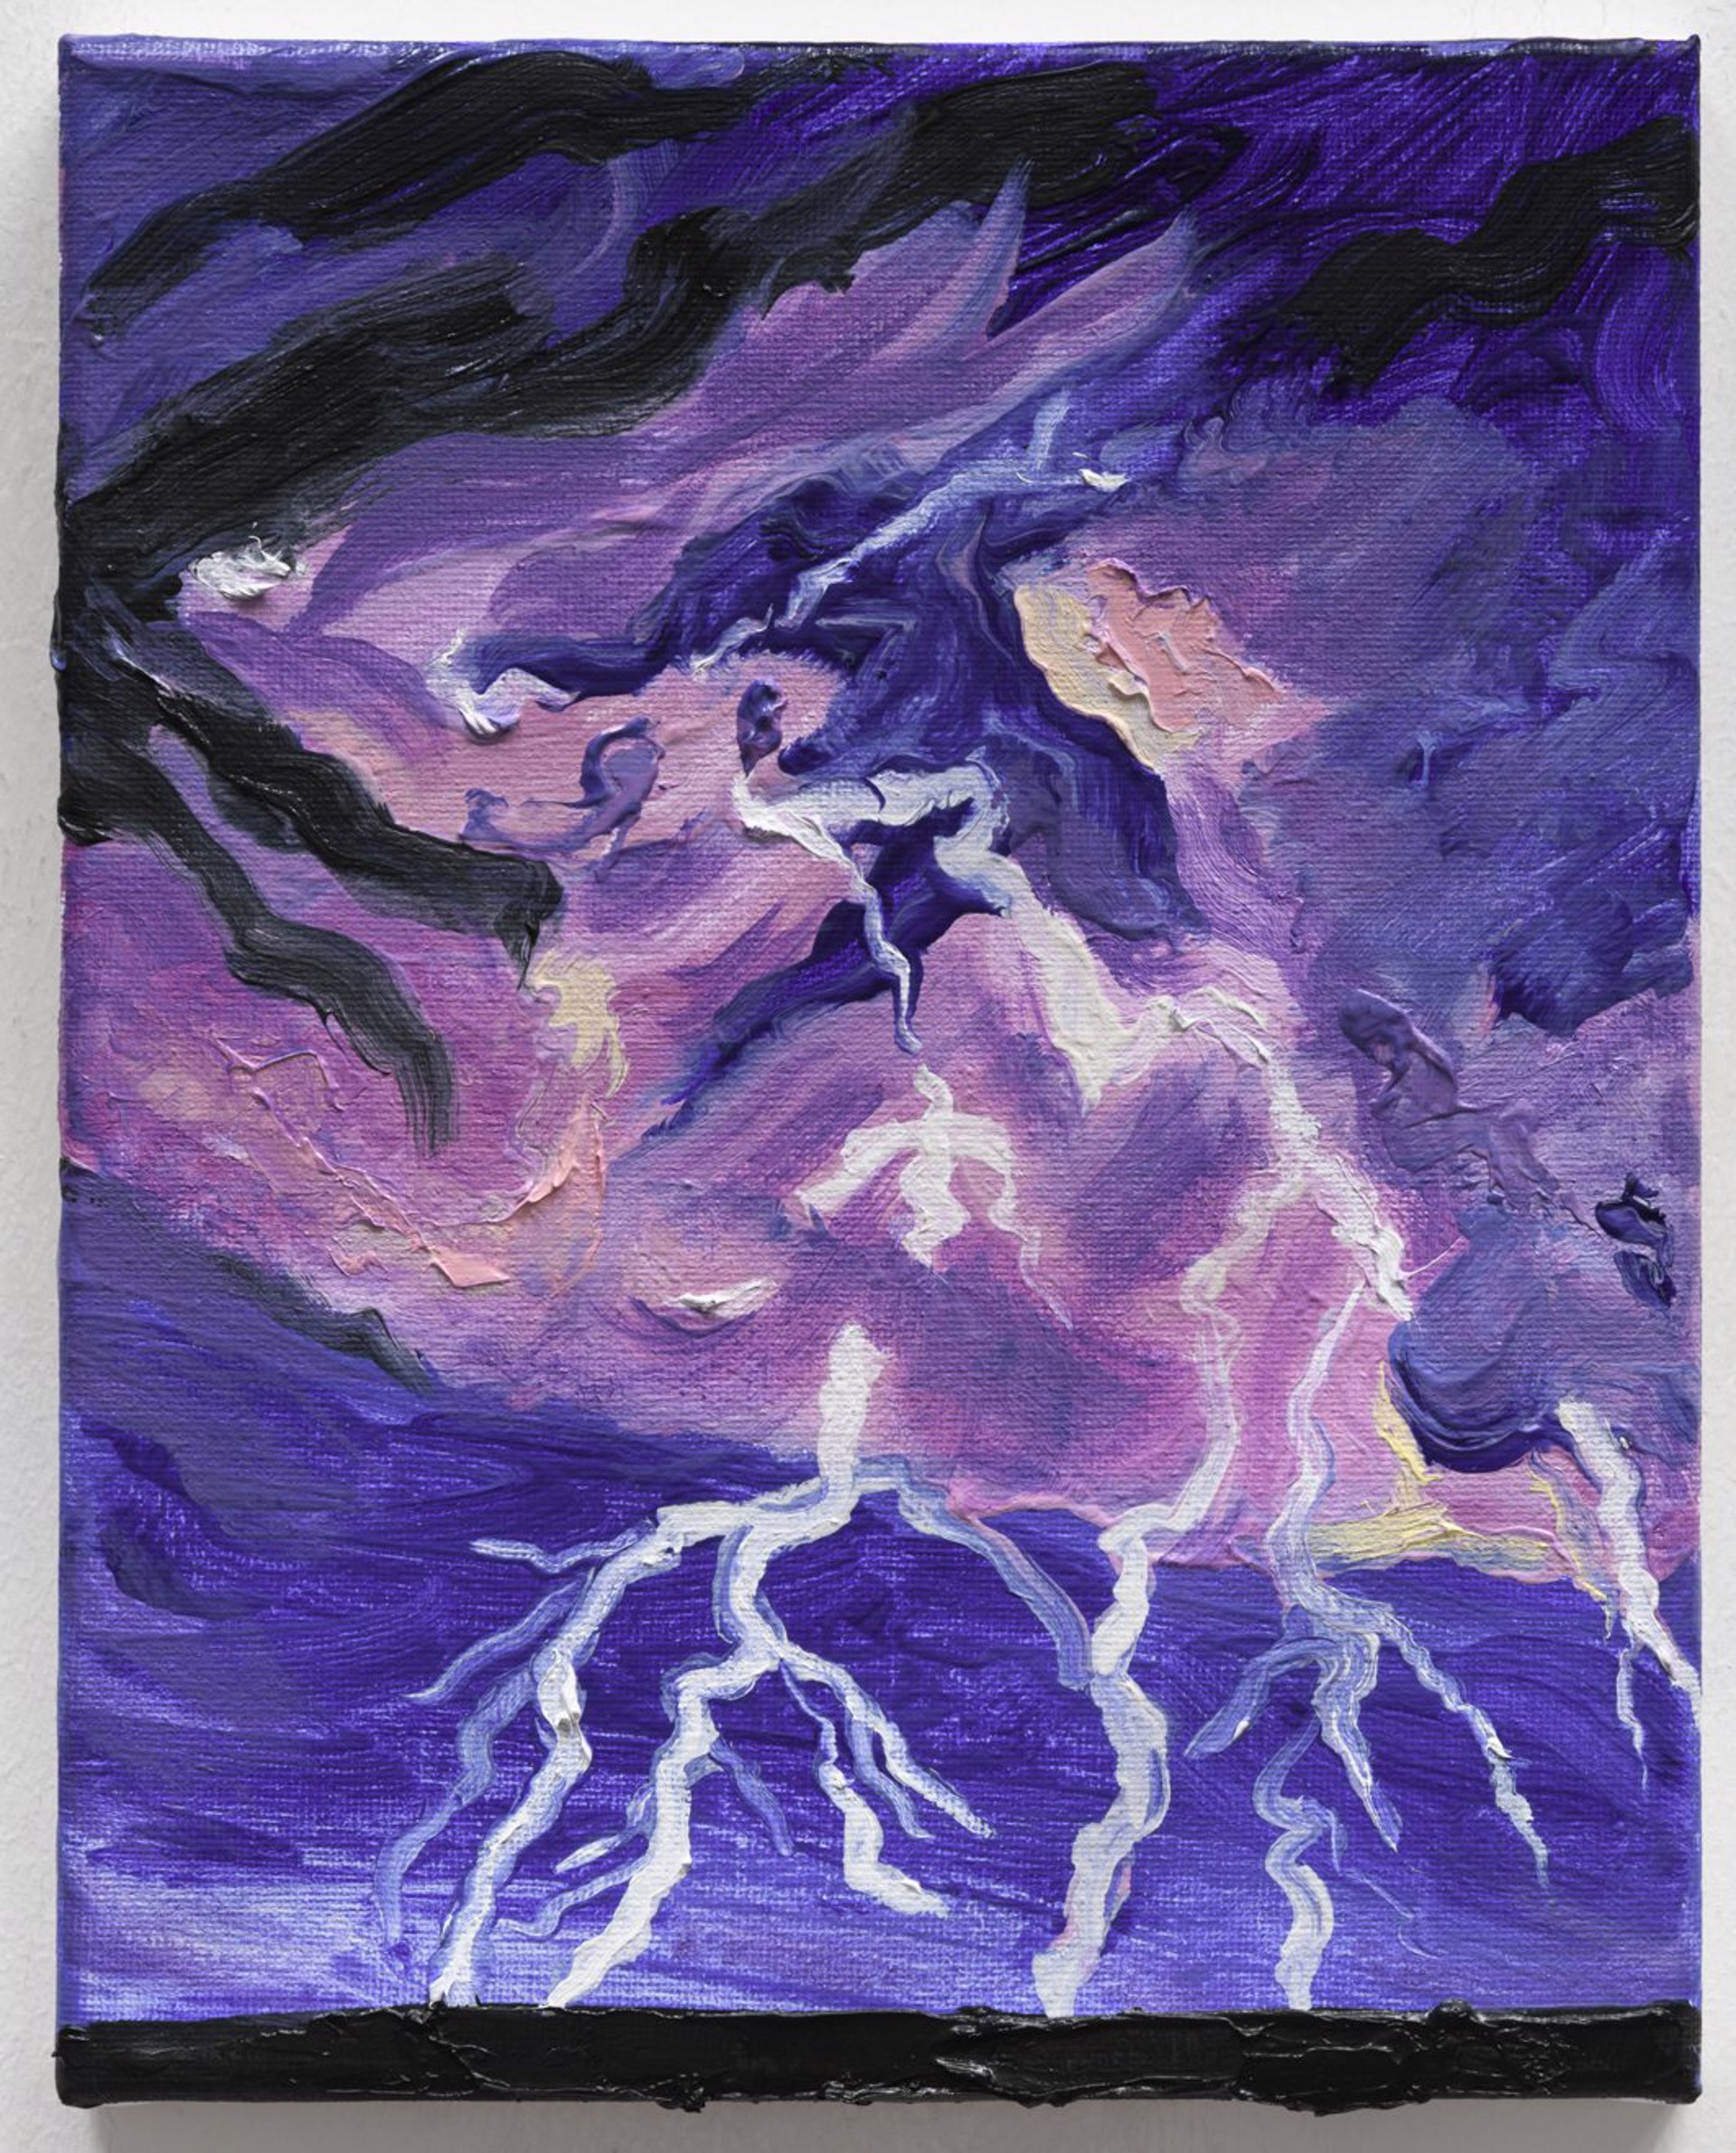 Lightning Storm by Susan Lizotte